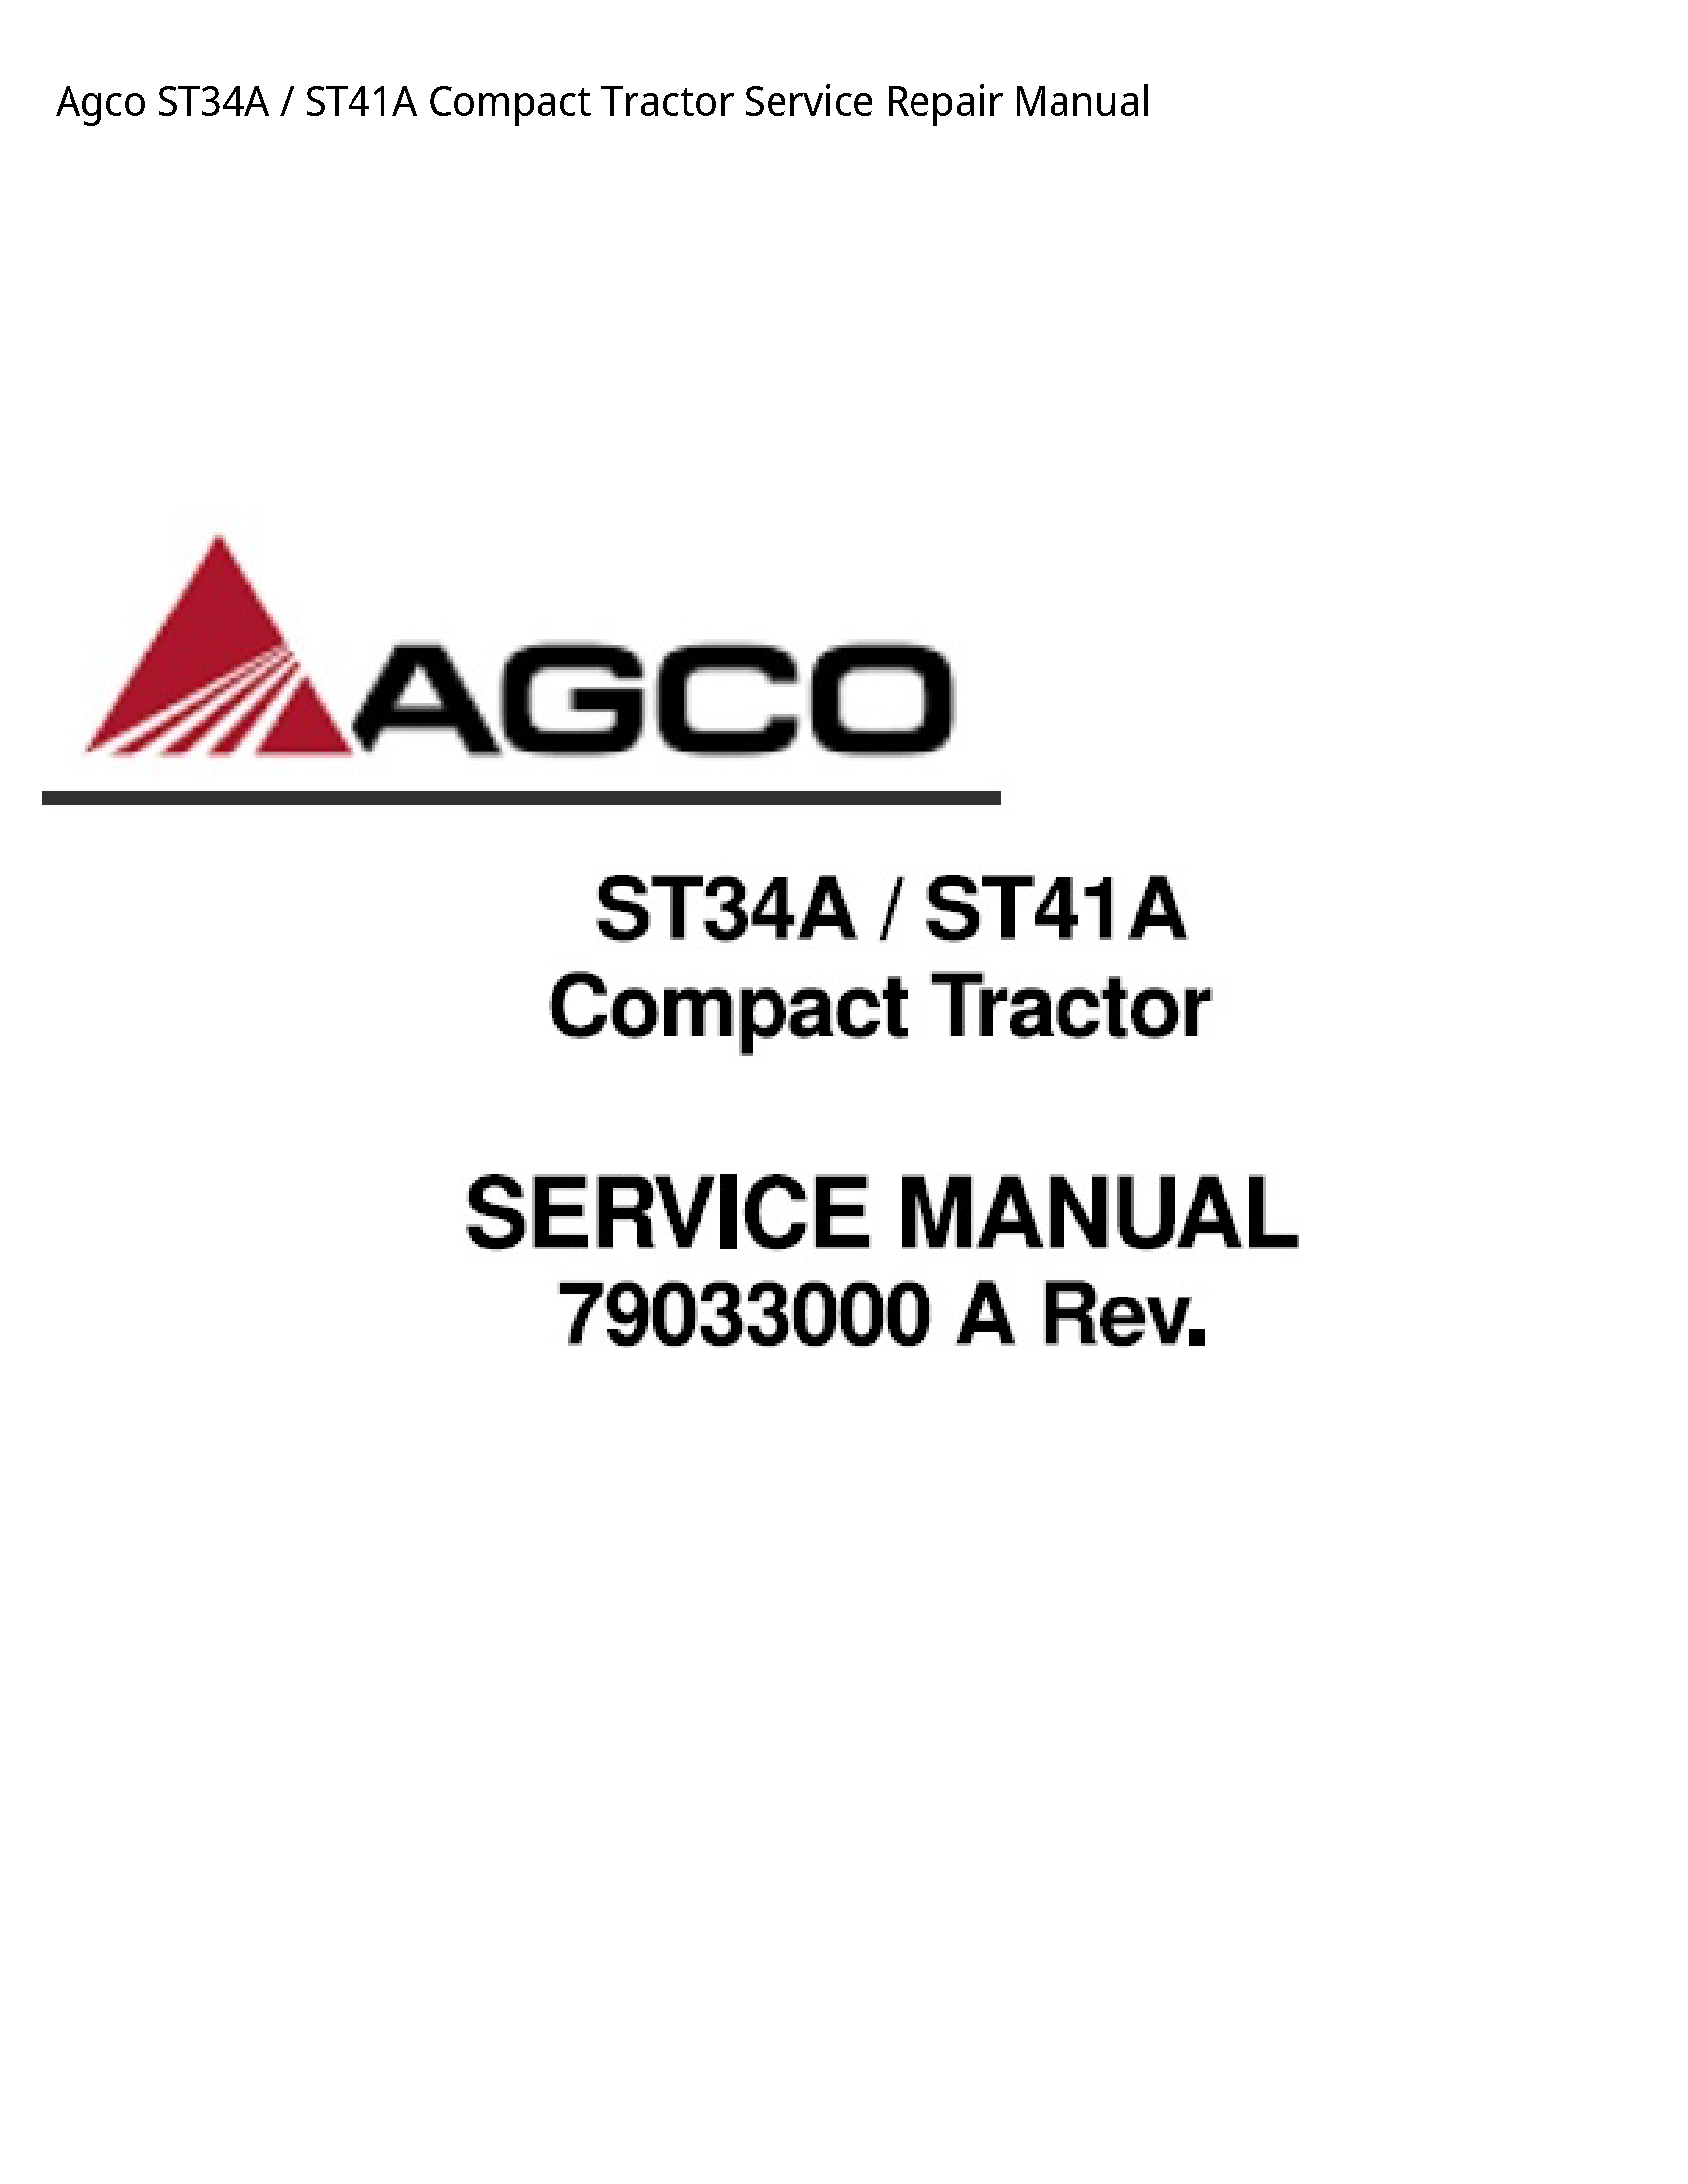 AGCO ST34A Compact Tractor manual